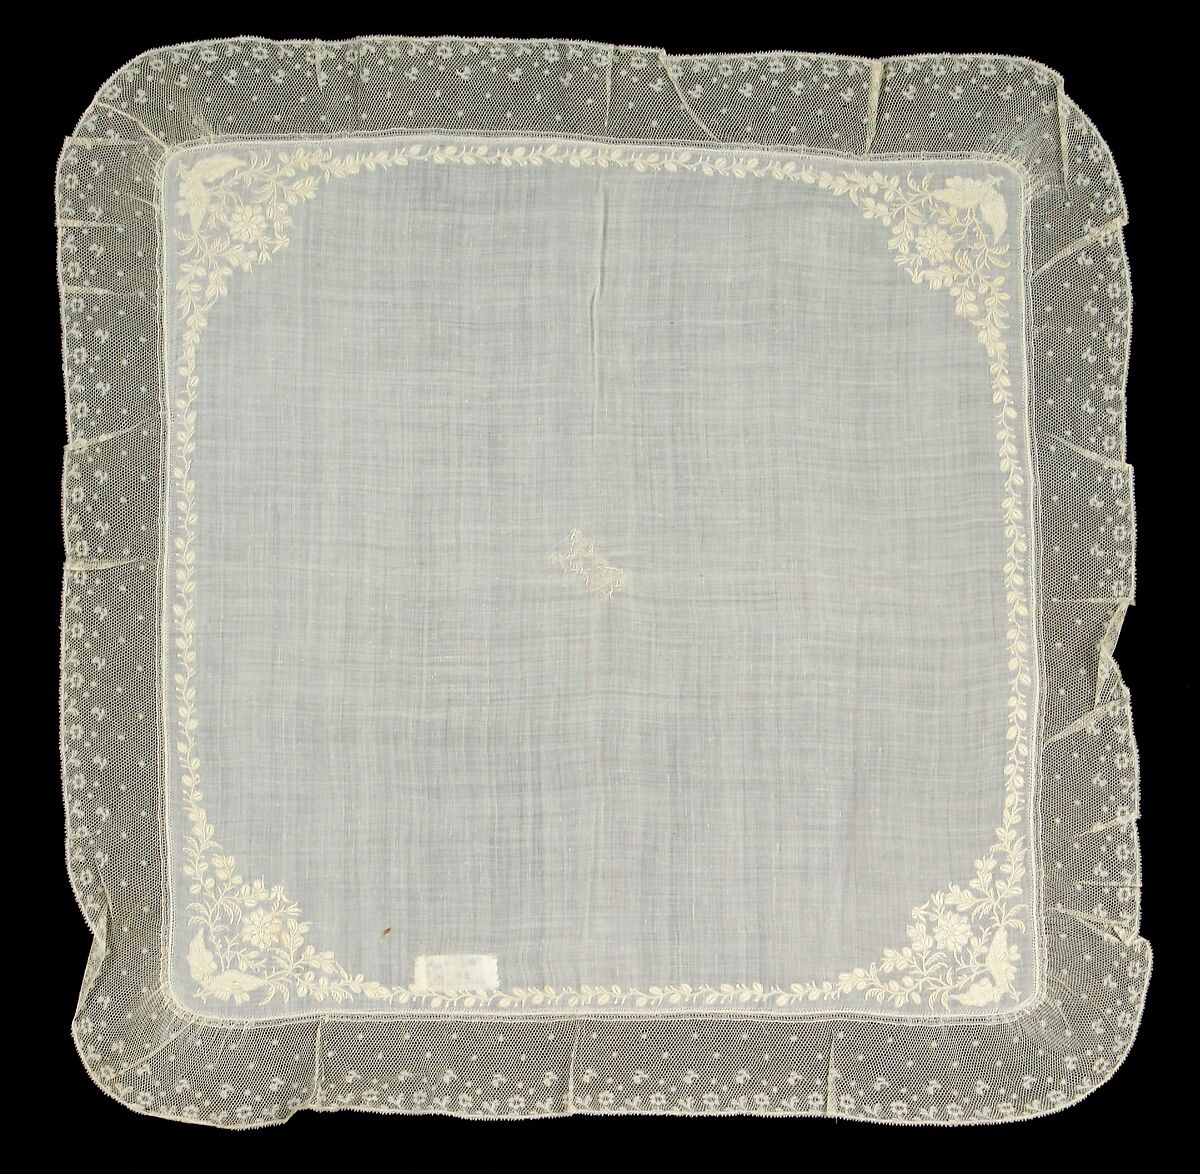 Handkerchief, Linen, possibly French 